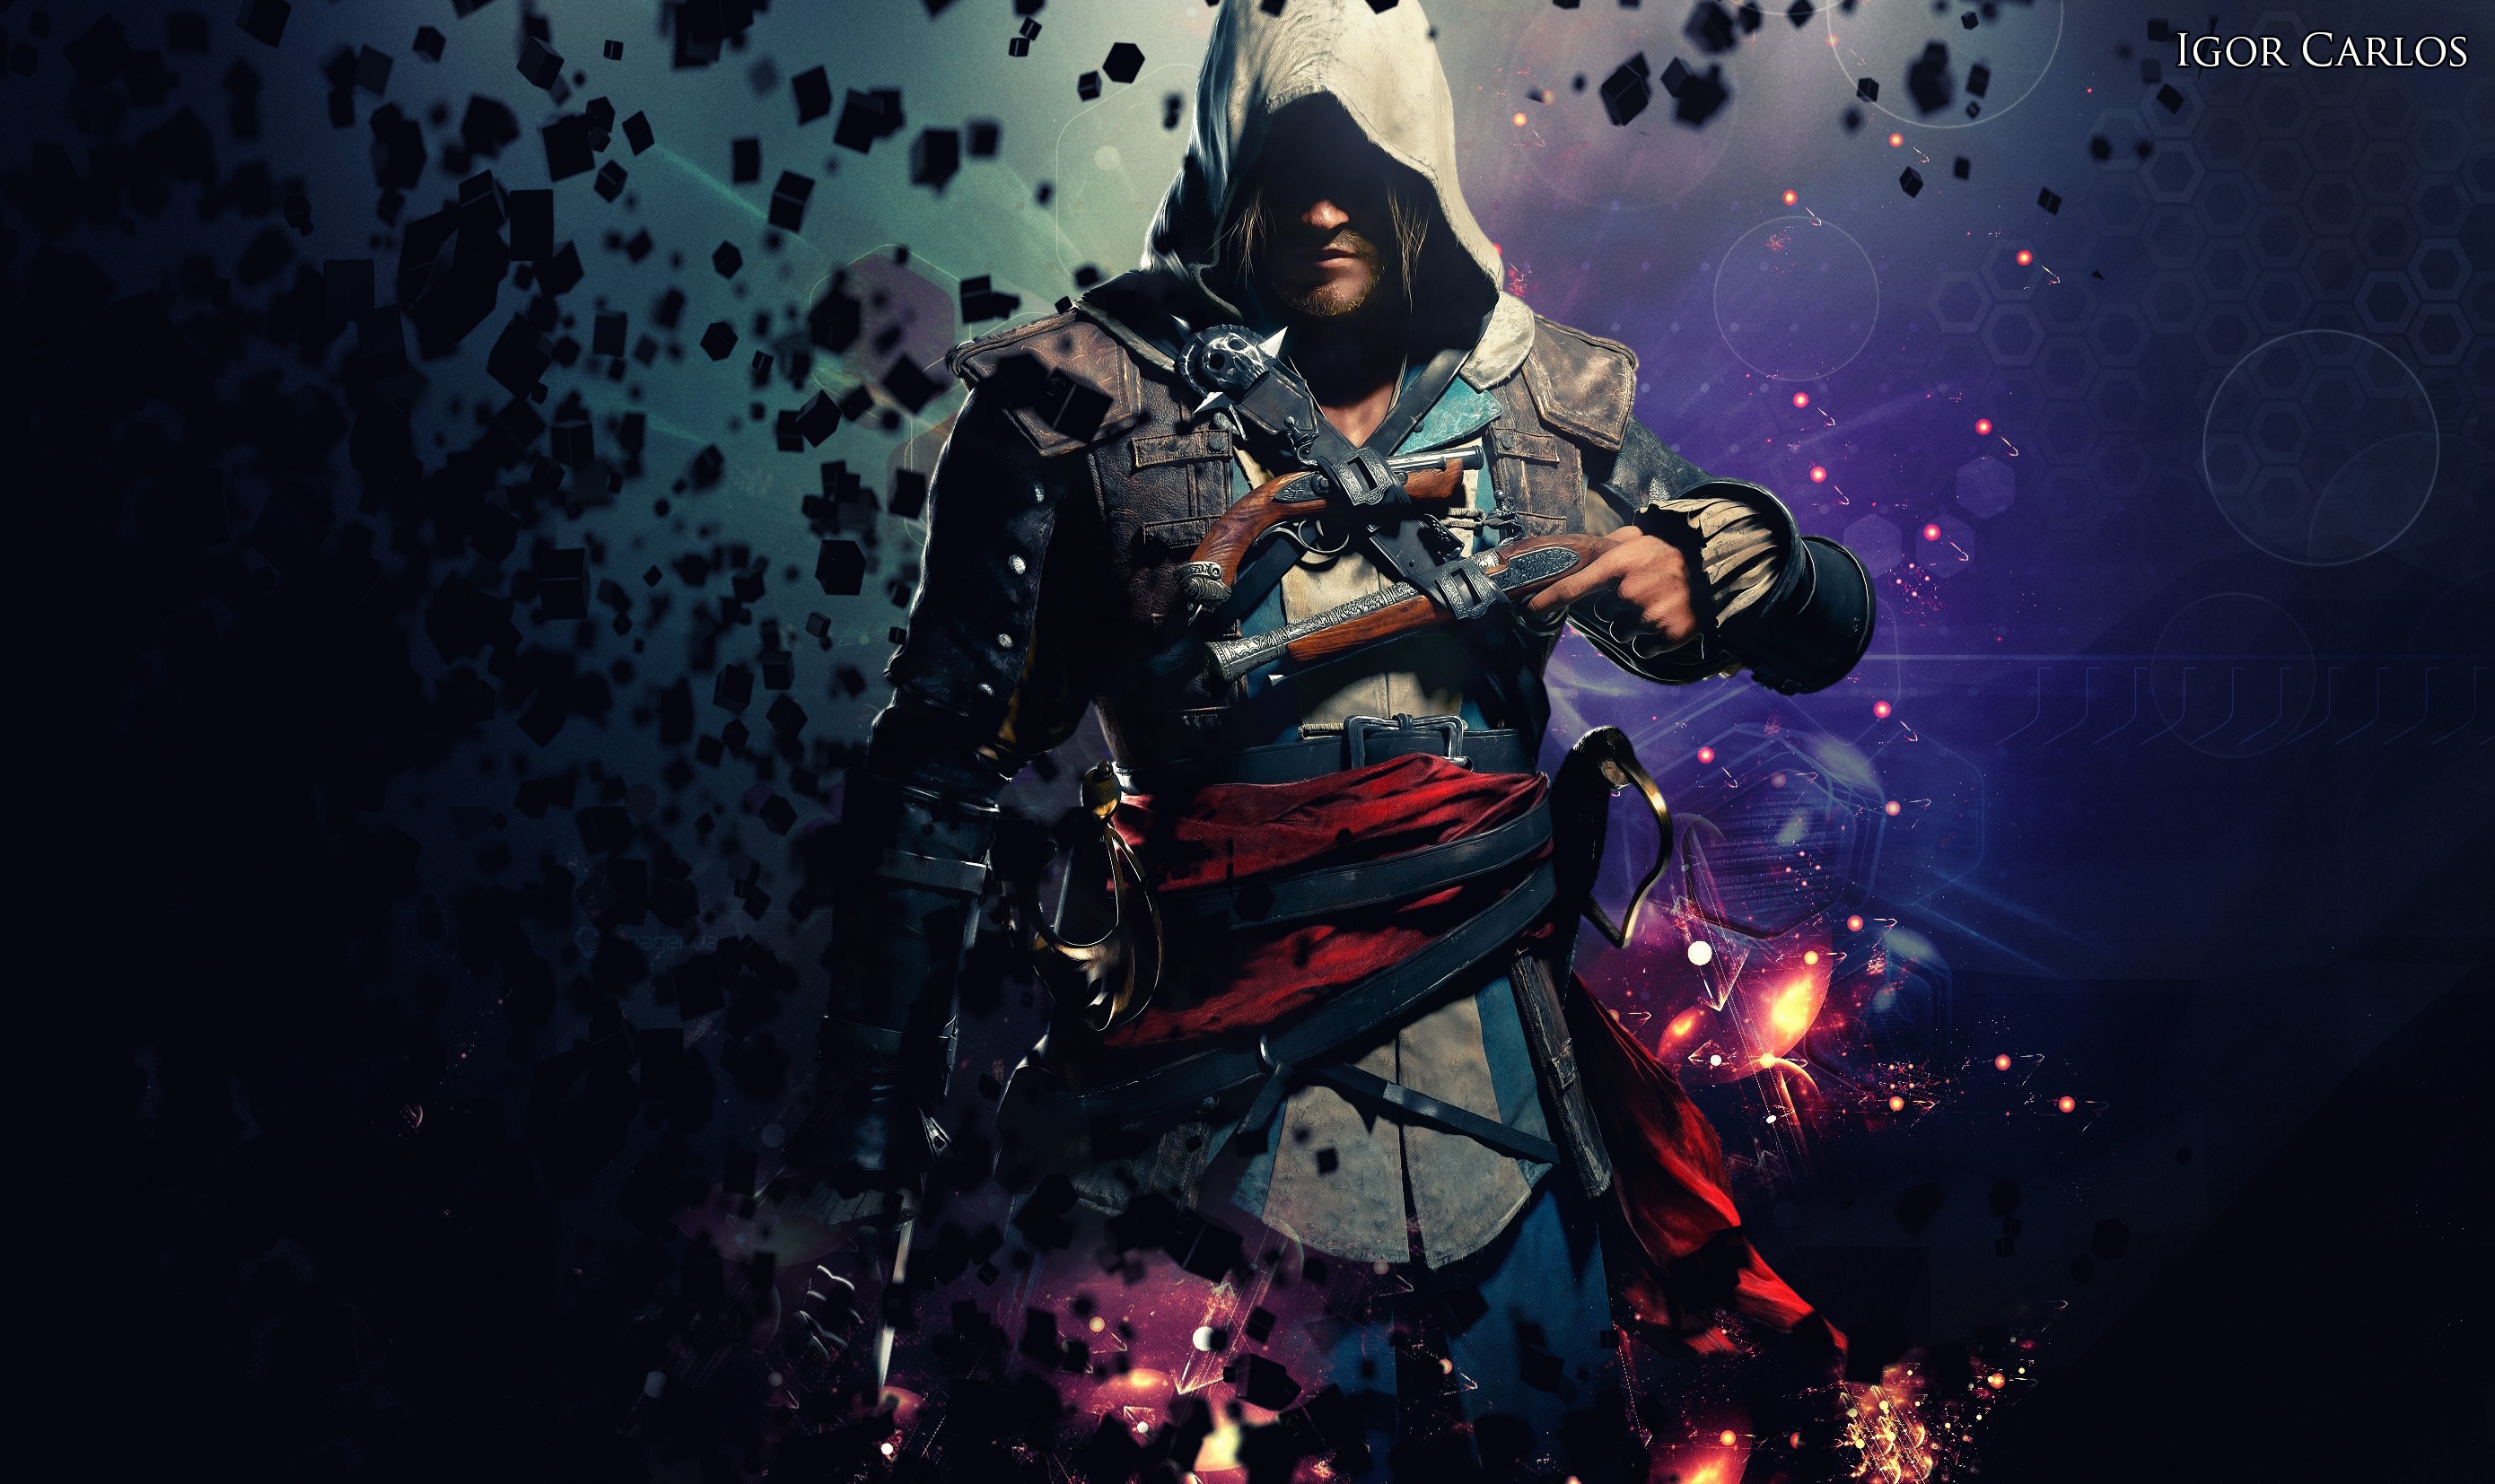 Edward Kenway Video Game Heroes Video Games Hoods Assassins Creed 2780x1654